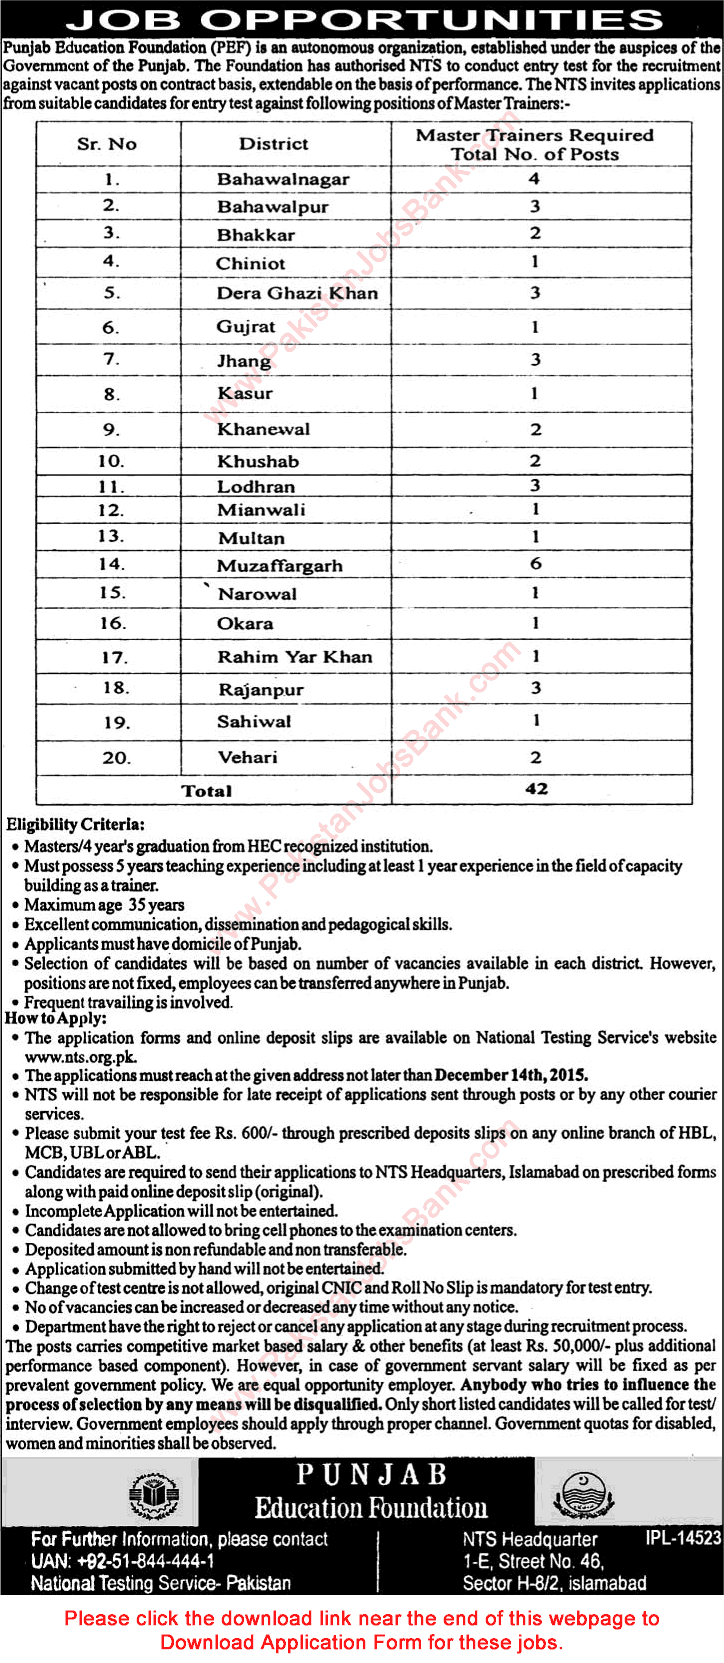 Master Trainer Jobs in Punjab Education Foundation 2015 November PEF NTS Application Form Download Latest